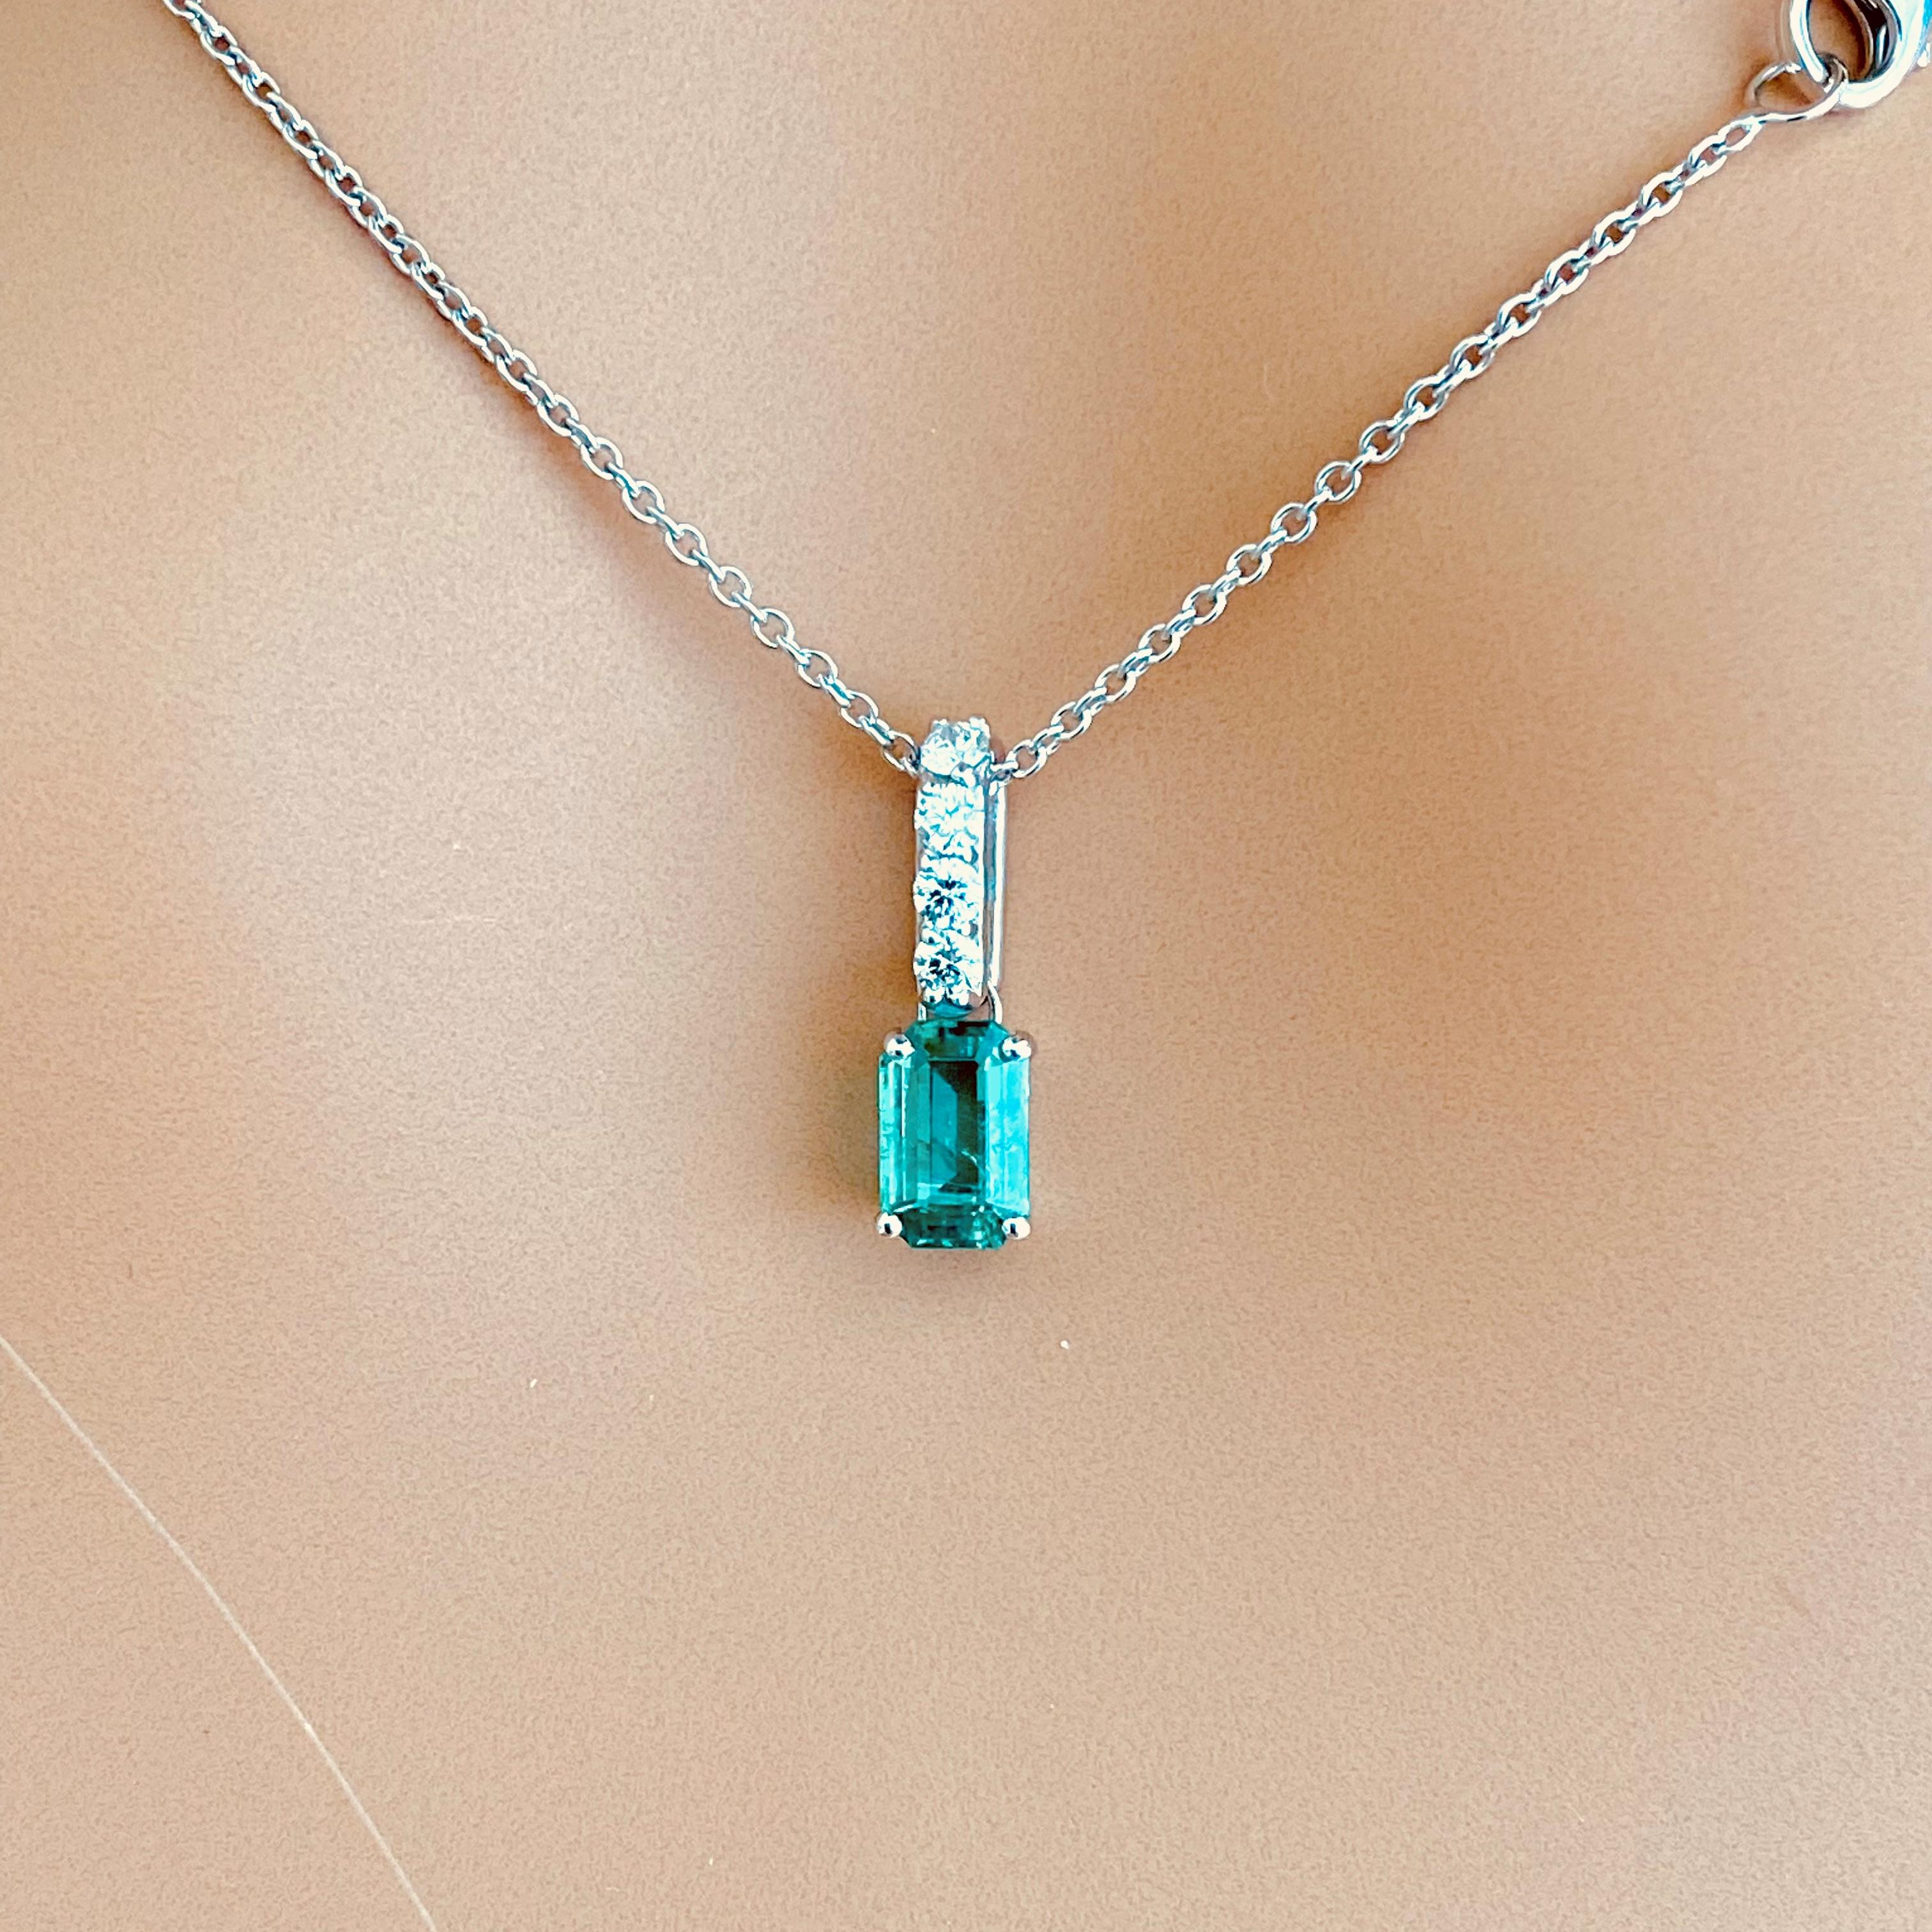 Contemporary White Gold Drop Pendant Necklace with Emerald and a Diamond Bail 